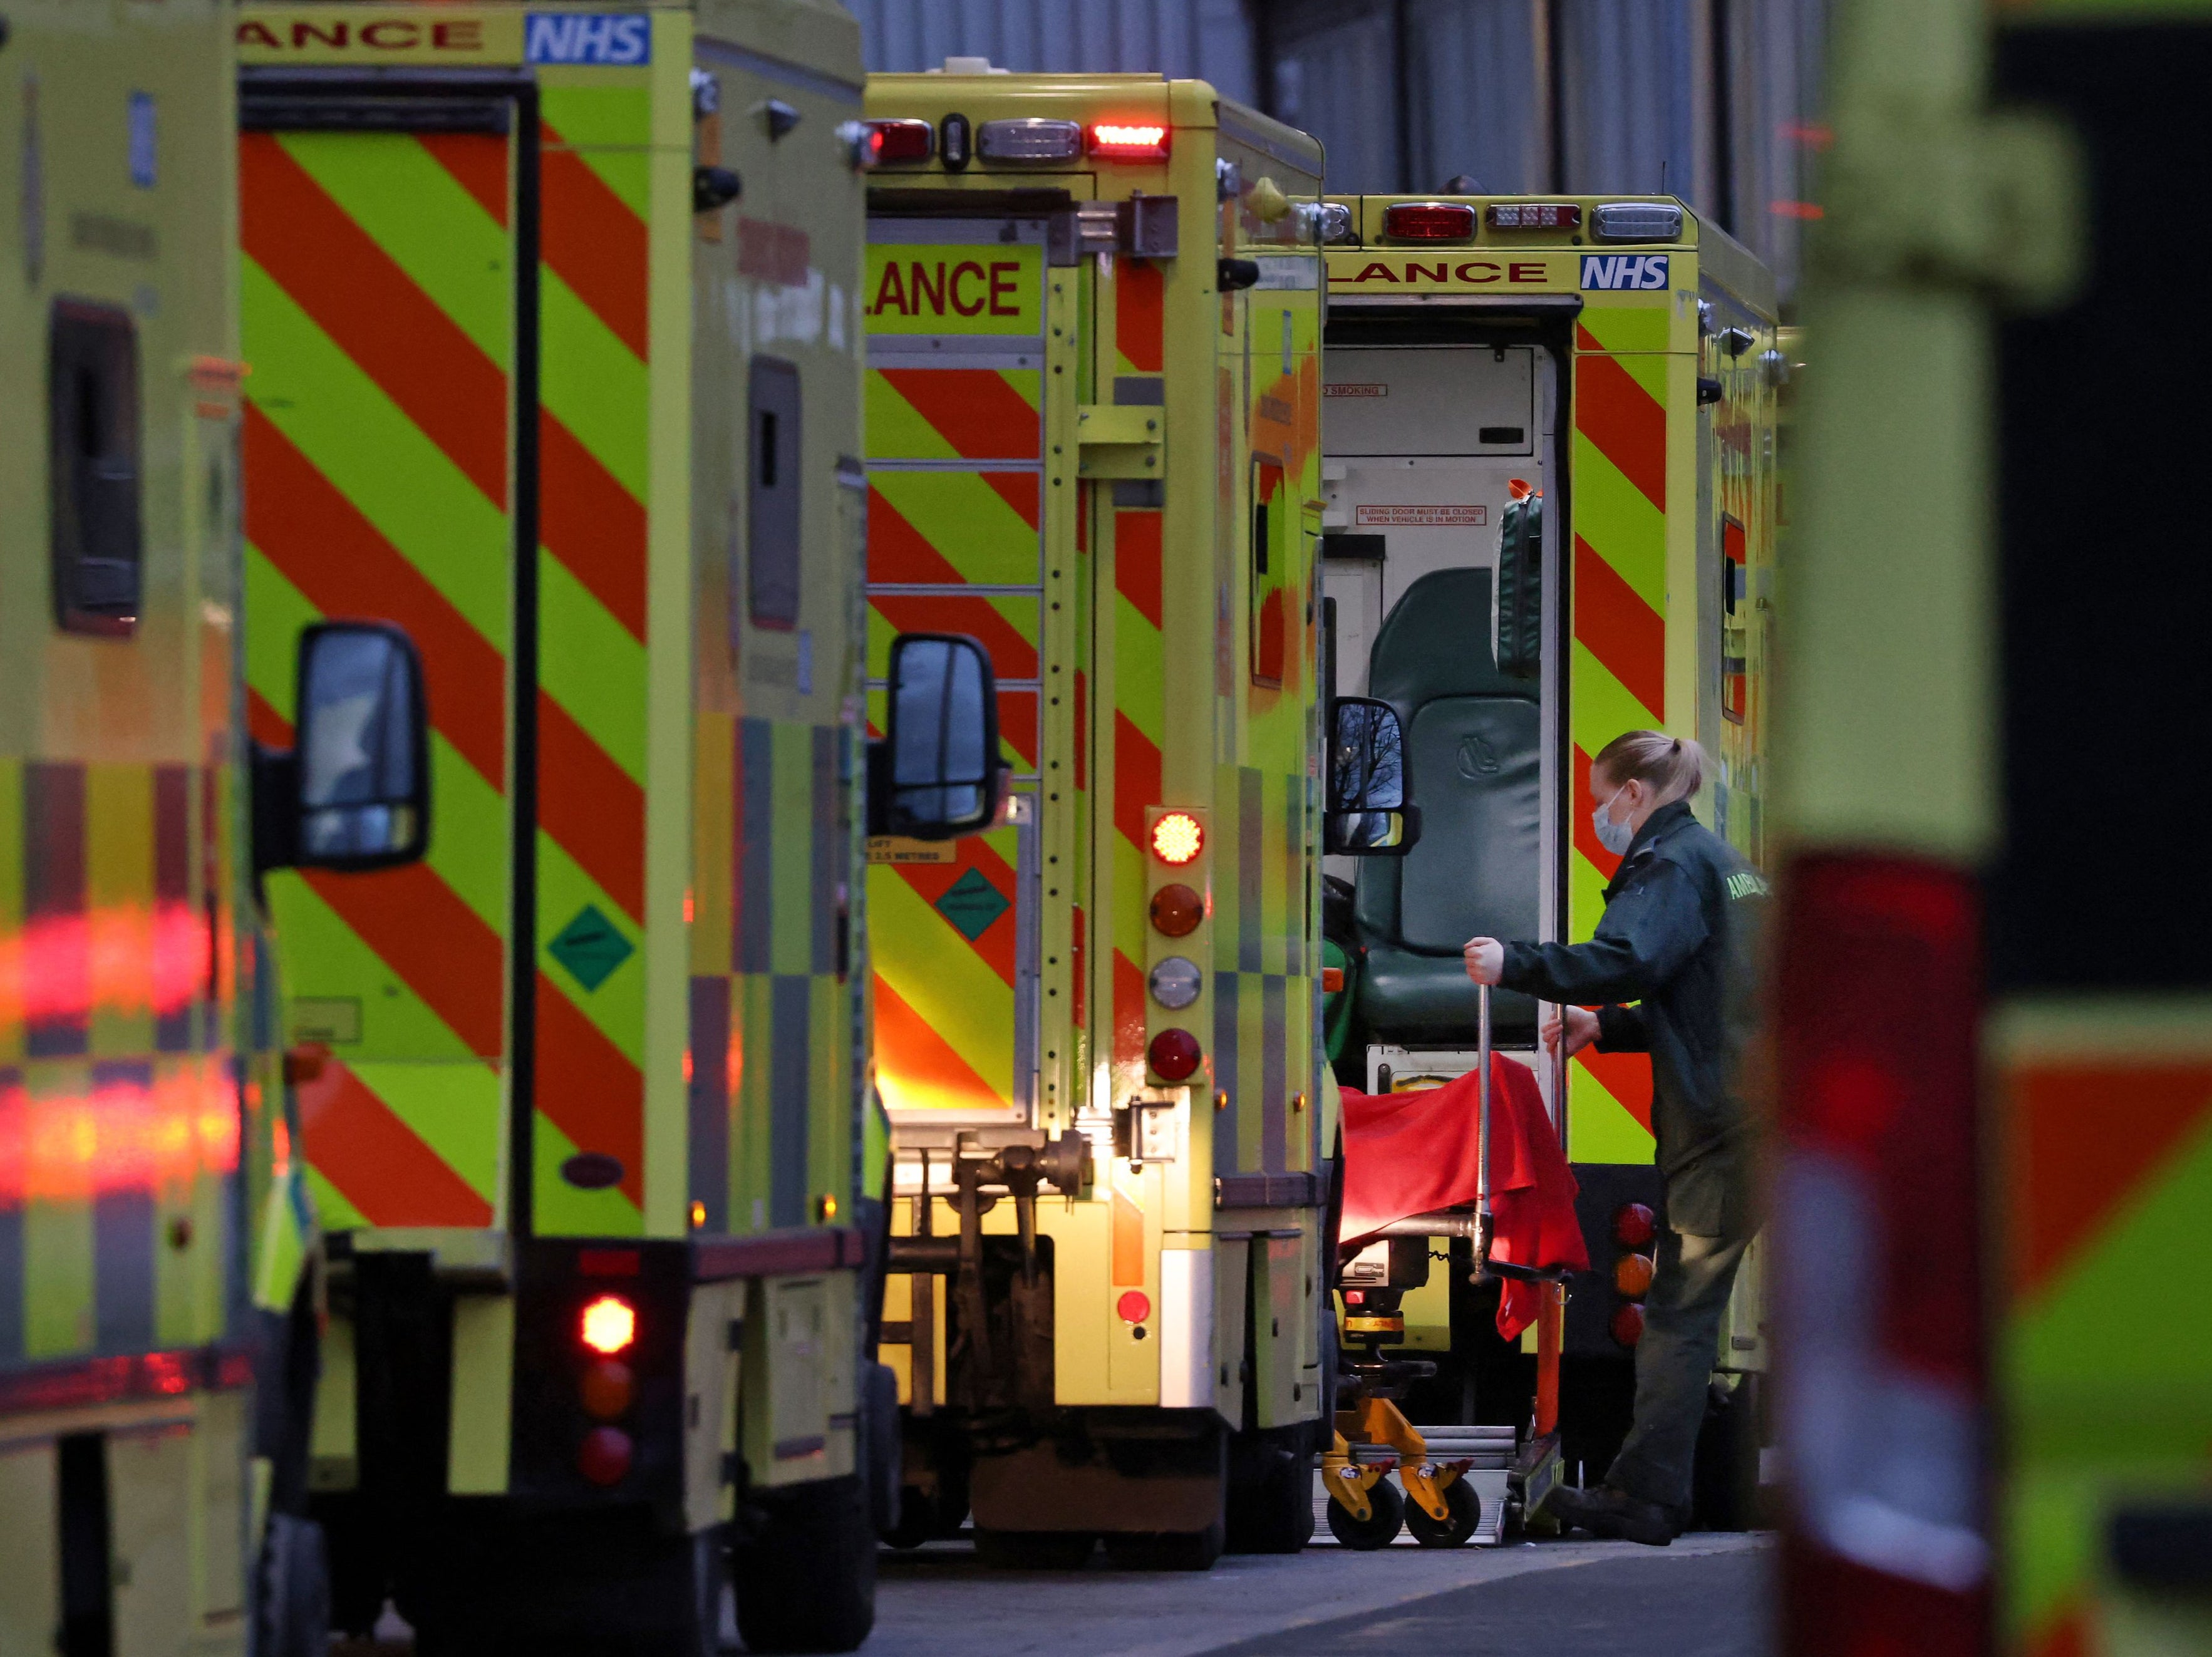 ‘Since the summer, healthcare services have faced new records waits in A&E, ambulance delays, discharge difficulties’